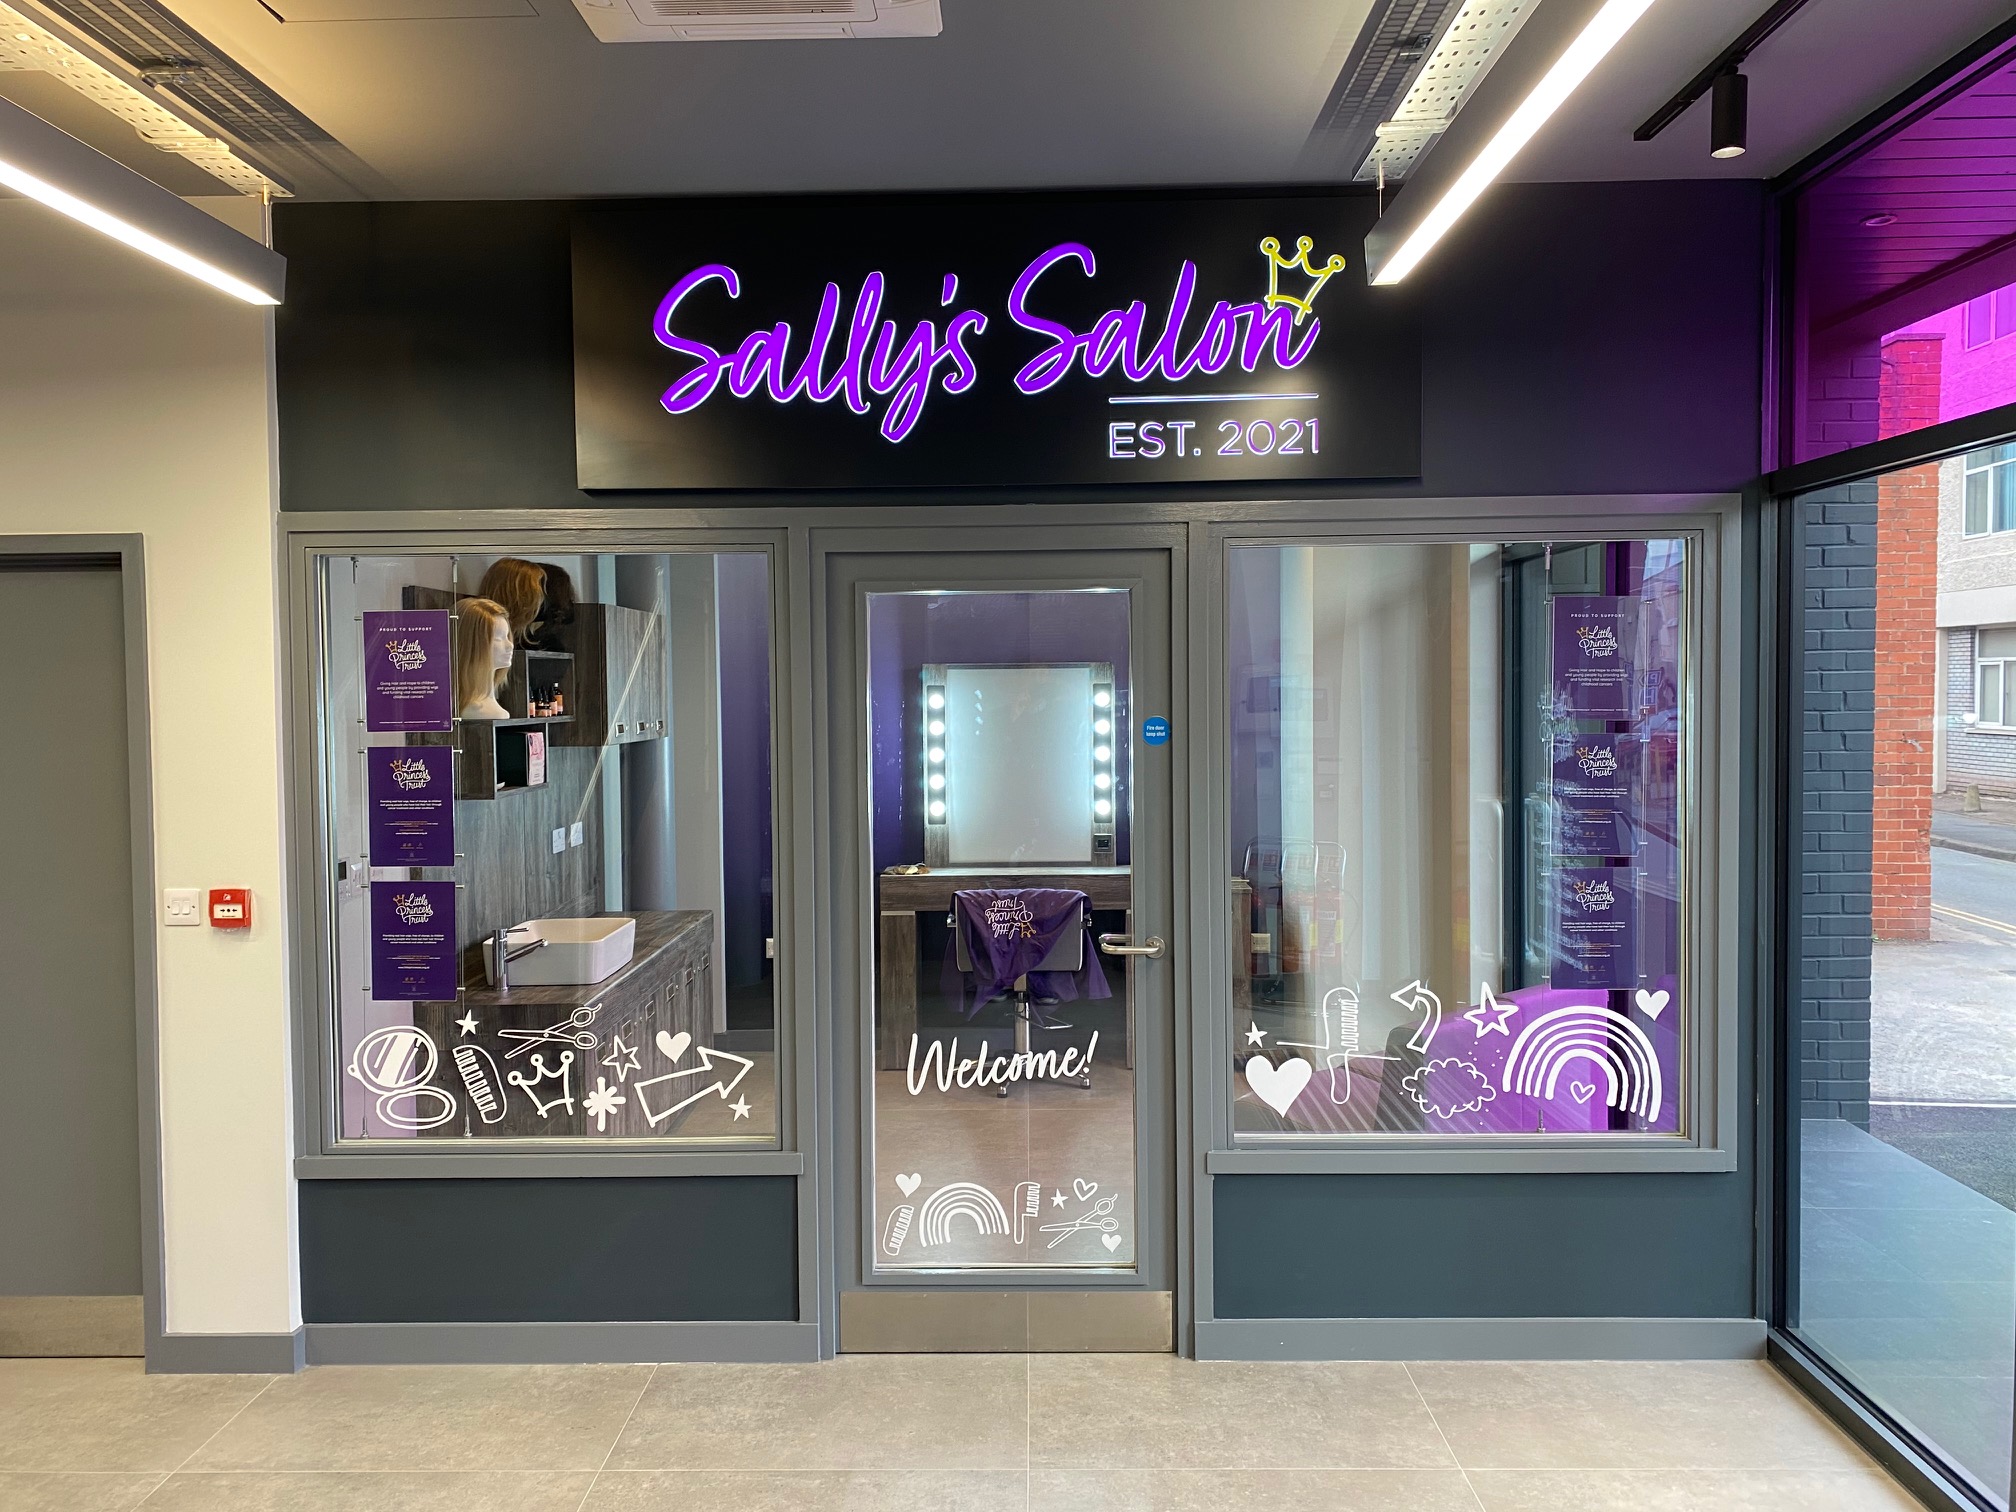 The Sally's Salon will allow us to fit and style wigs in our new home.